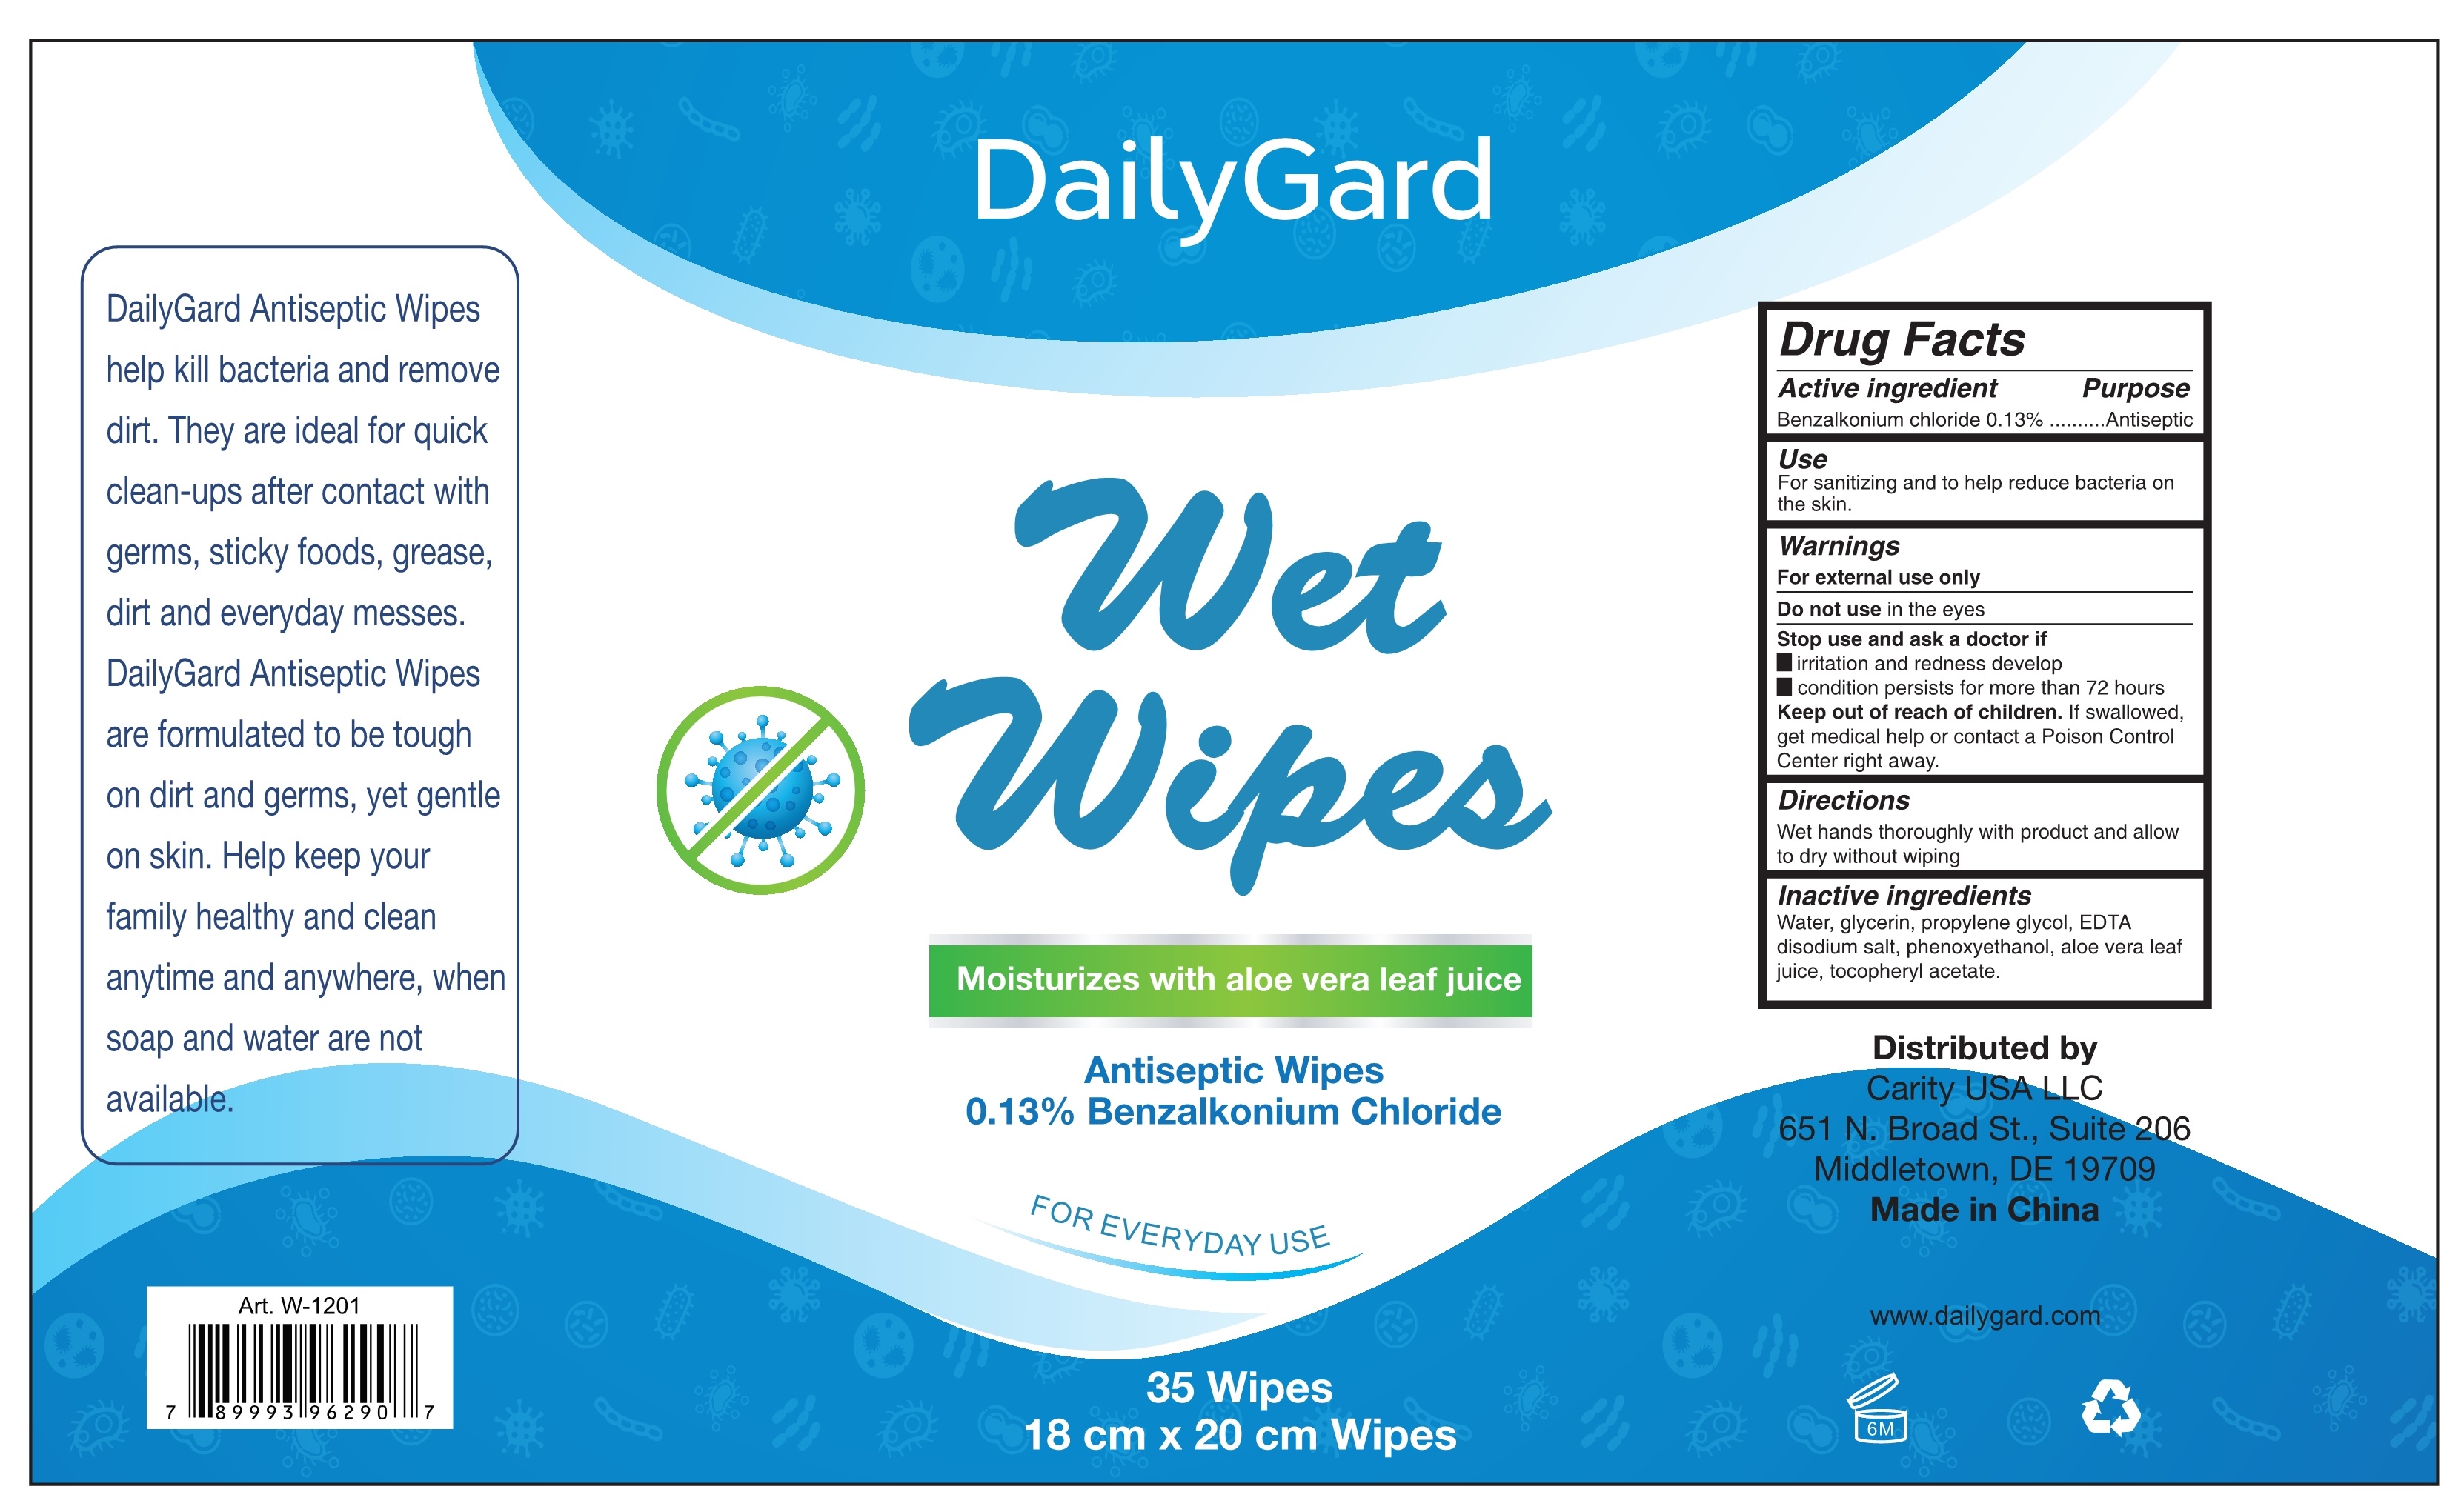 NDC 77765-015 Wet Wipes Images - Packaging, Labeling & Appearance